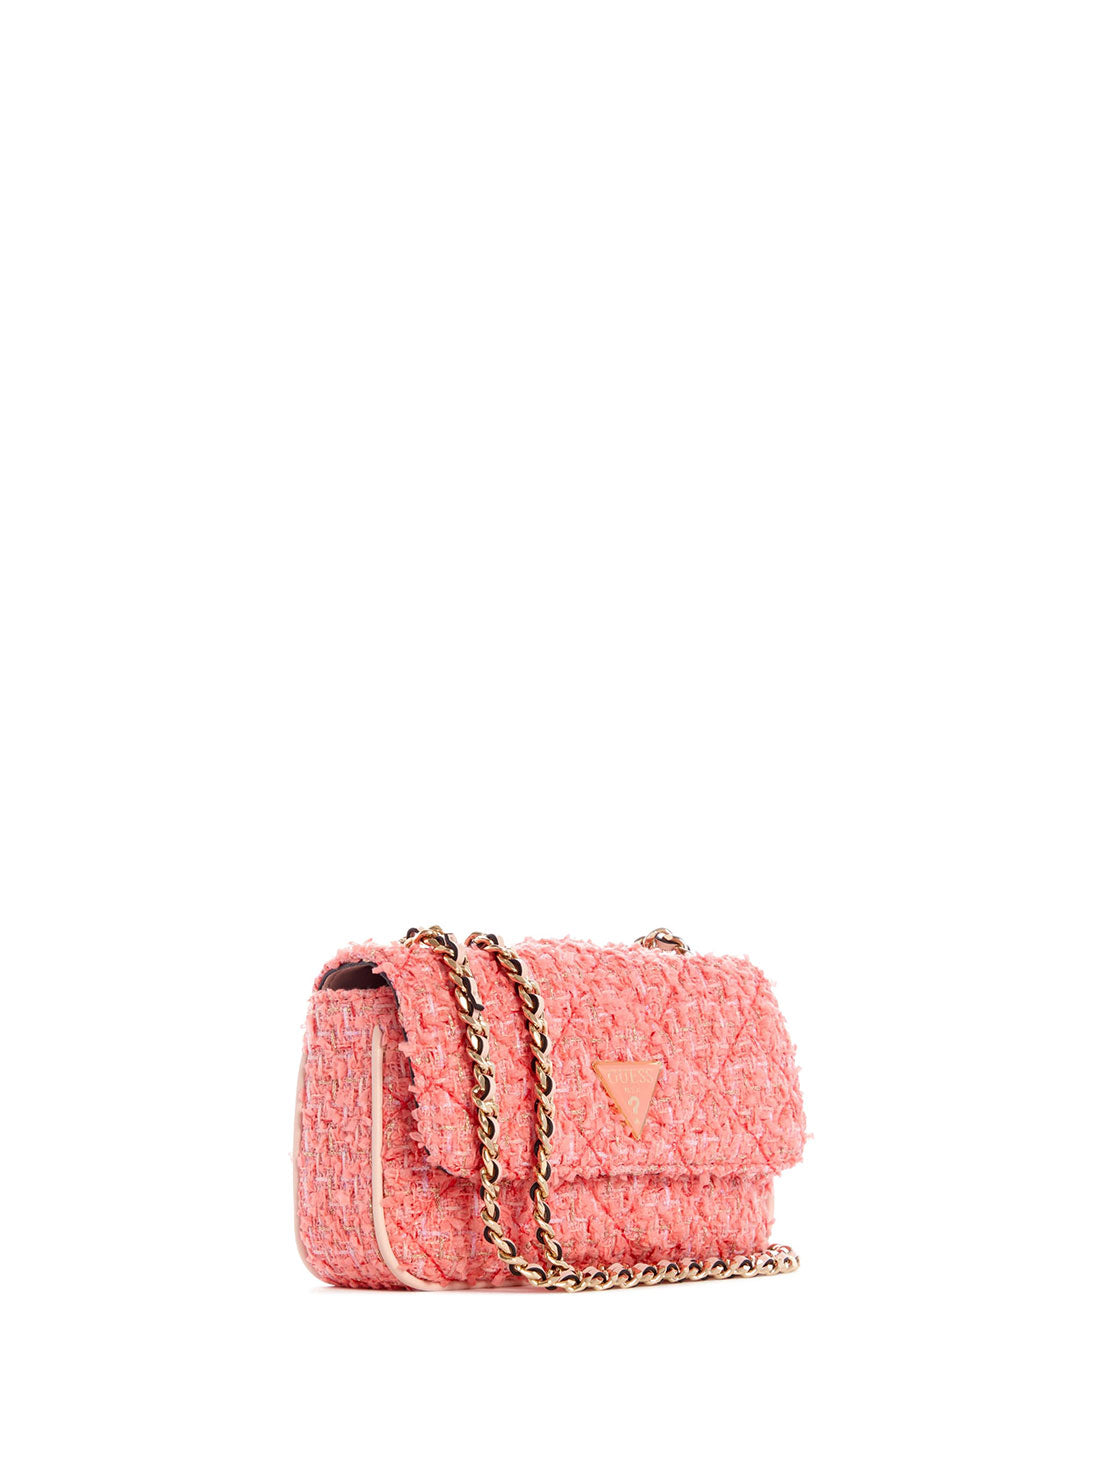 GUESS Womens Coral Pink Tweed Cessily Micro Mini Crossbody Bag TC767978 Side View